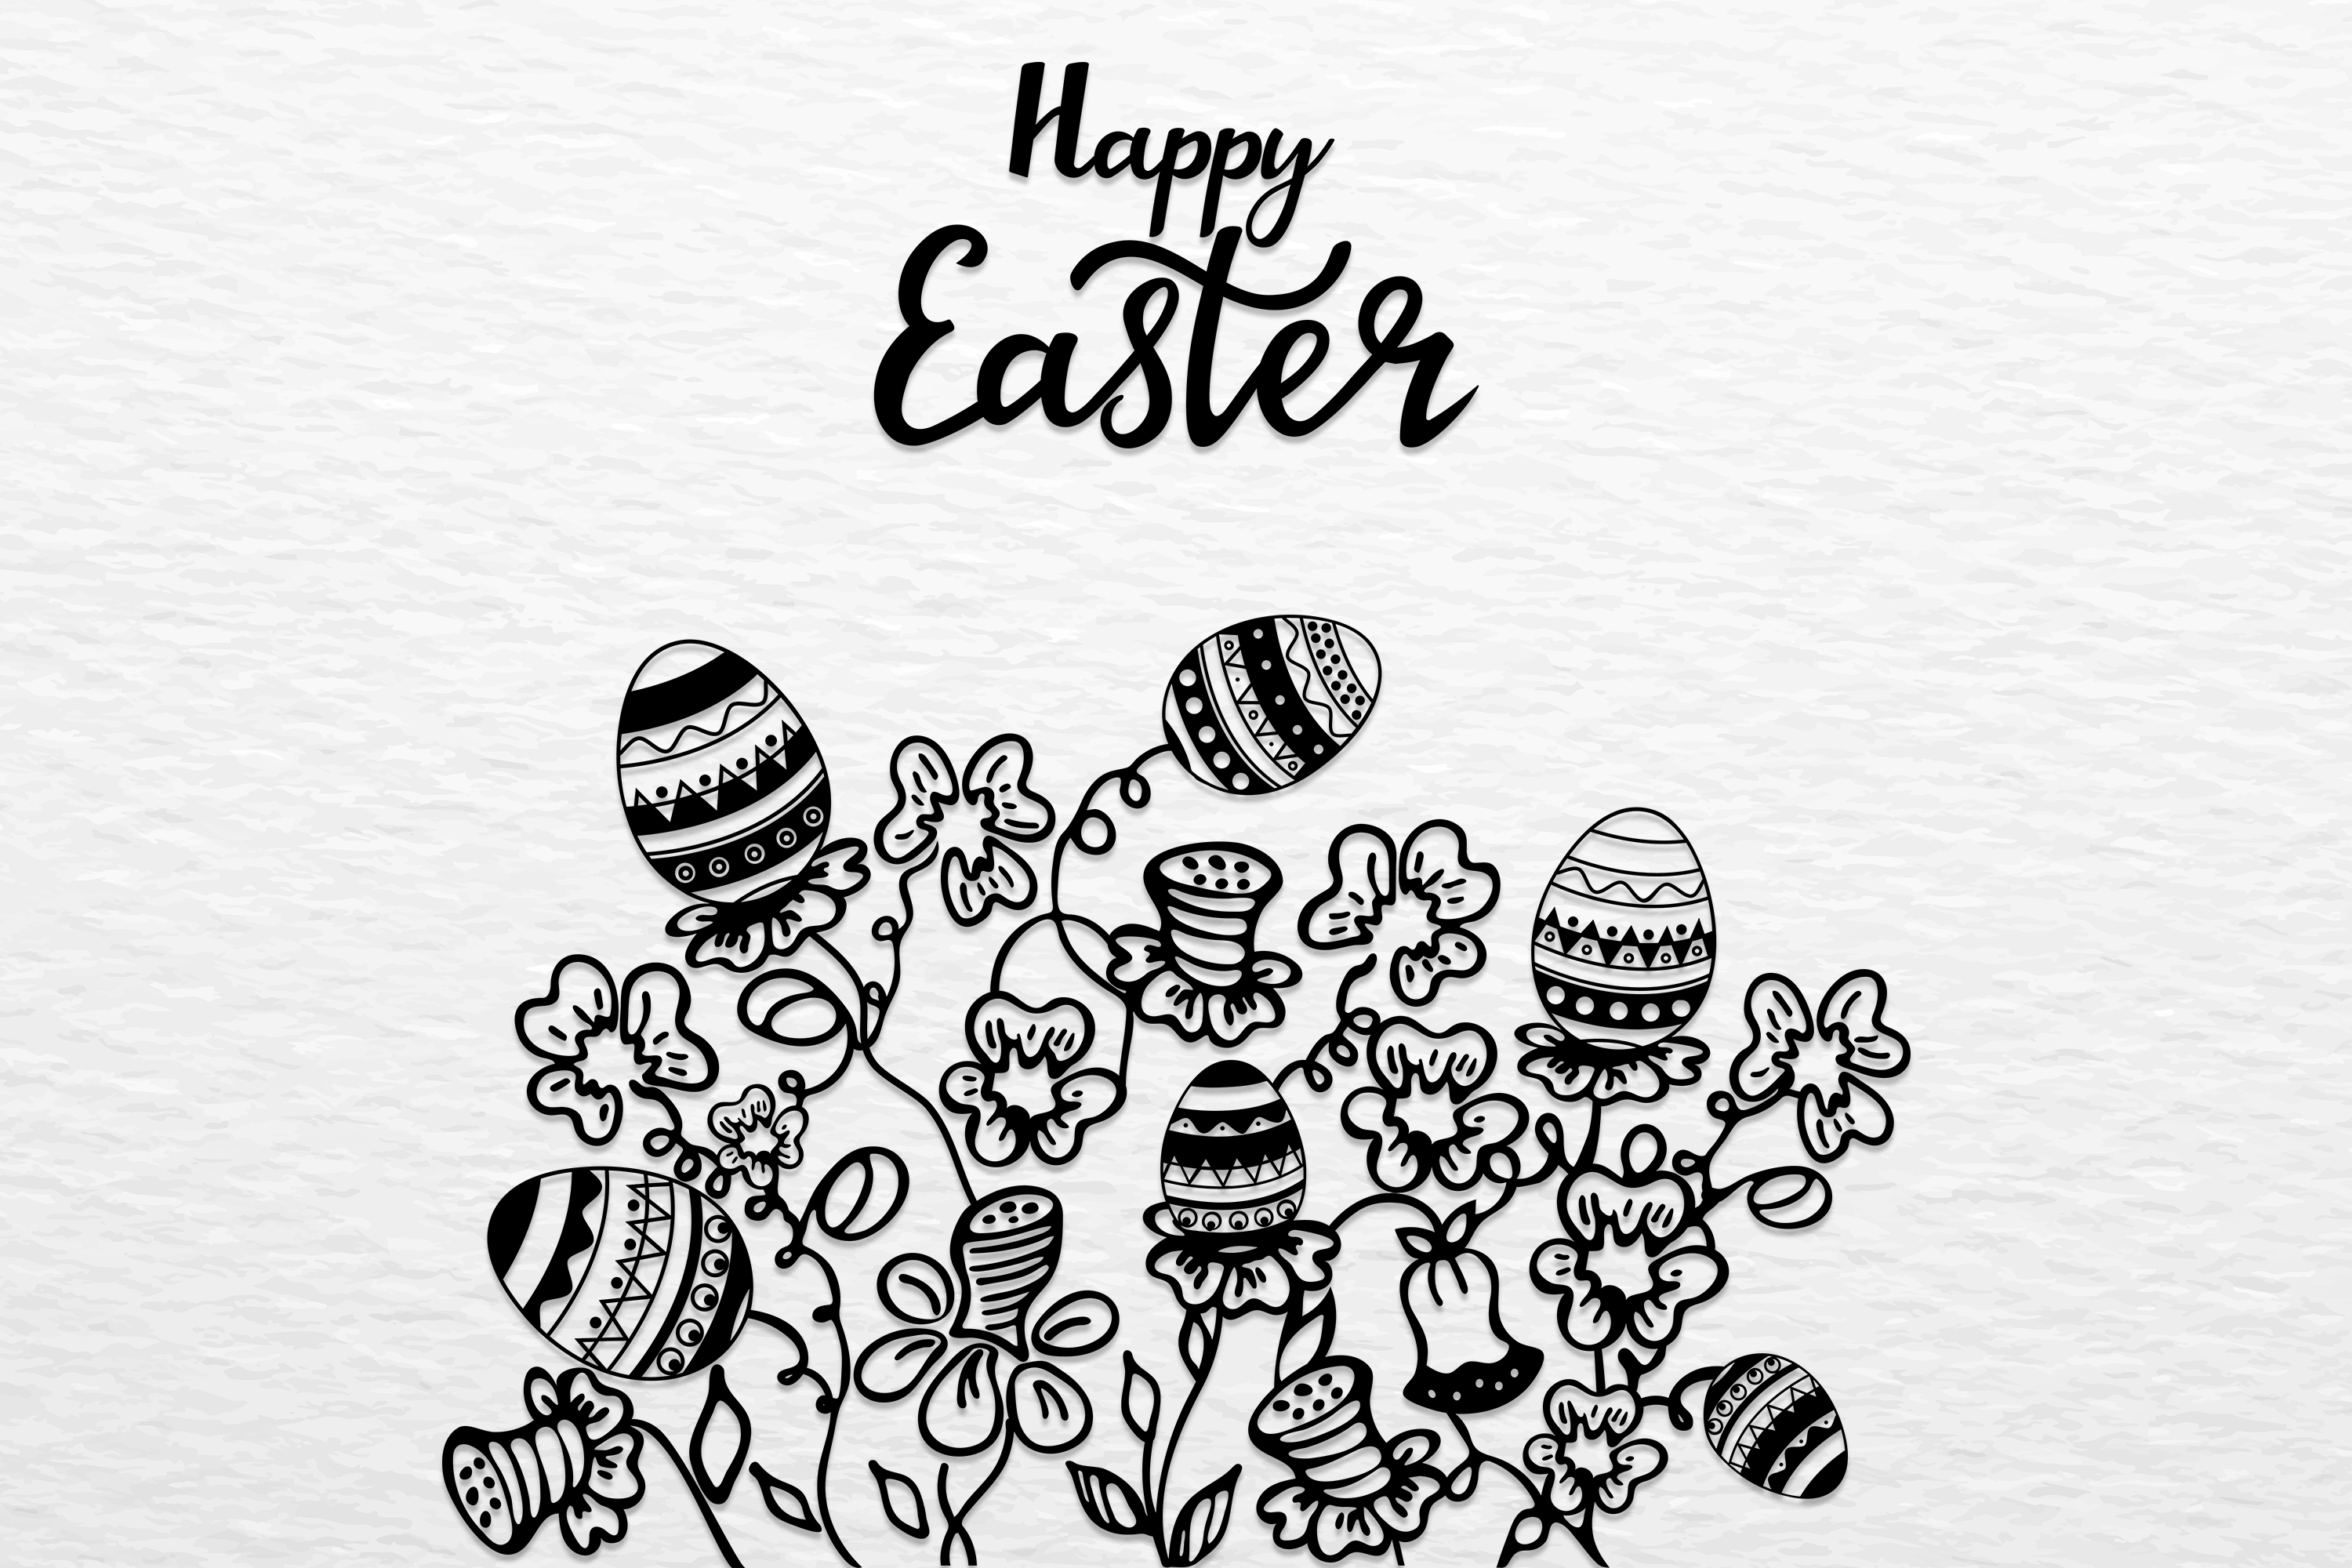 Download Happy Easter. Wreath with flowers, herbs and eggs. SVG Cut